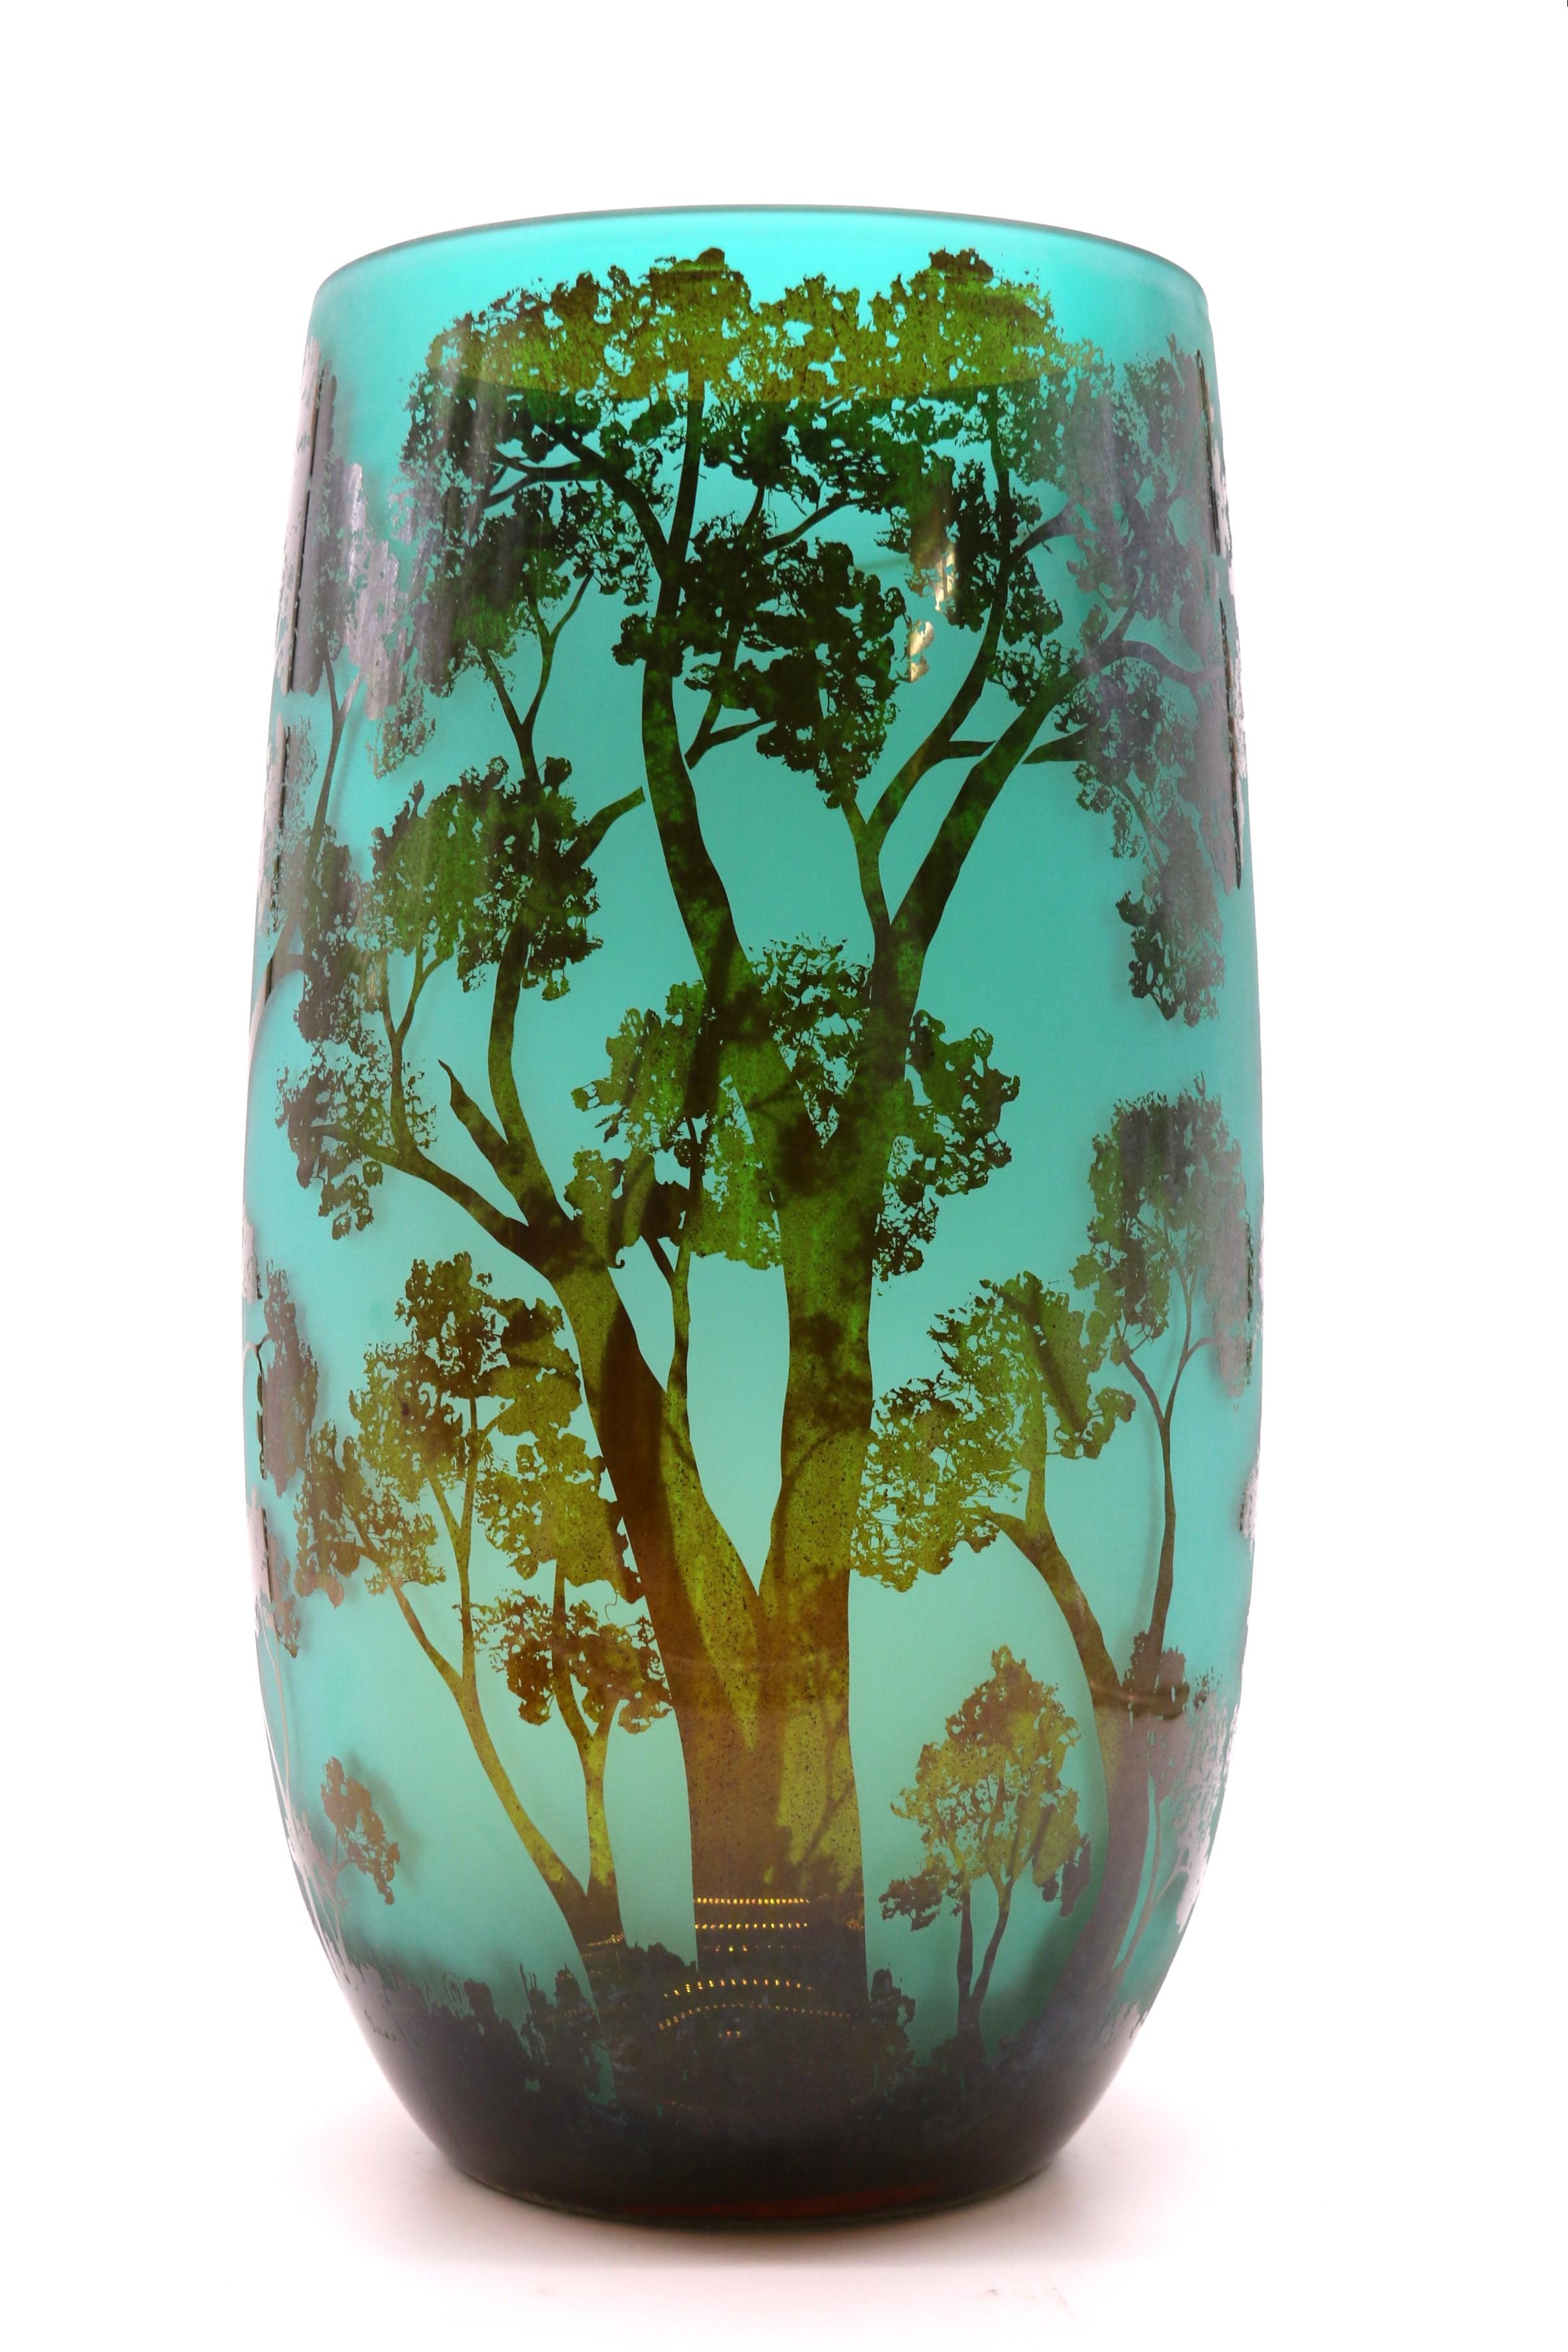 Glass A large 20th century cameo glass vase decorated with an intricate woodland scene